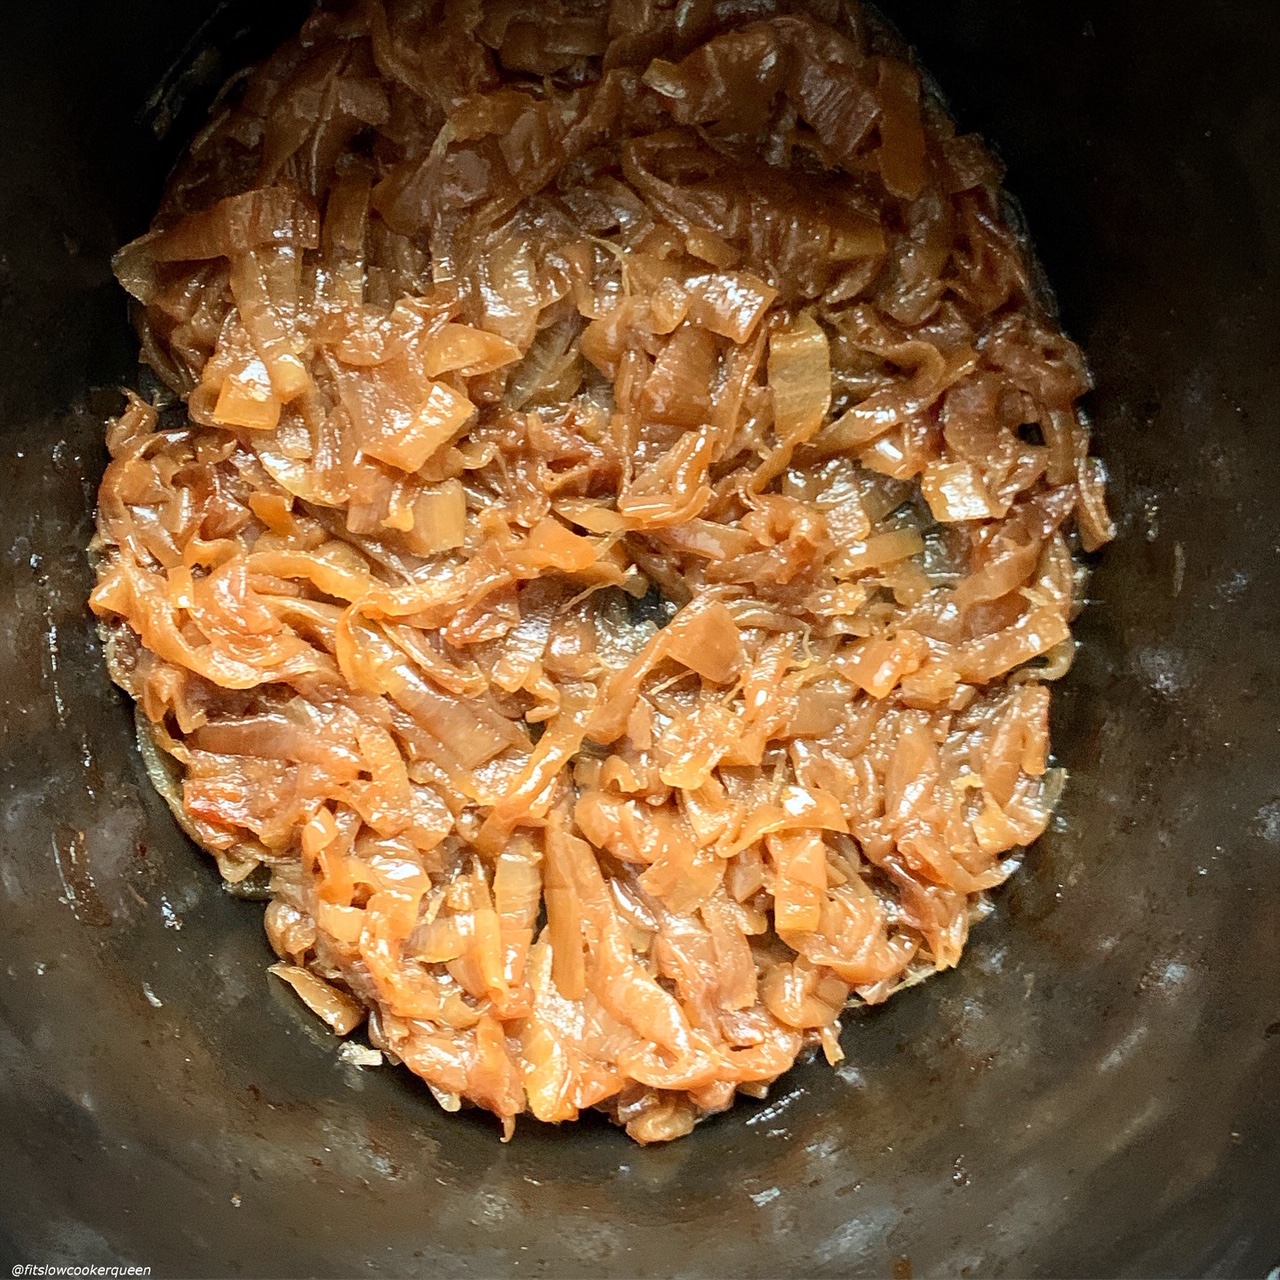 cooked caramelized onions in the slow cooker